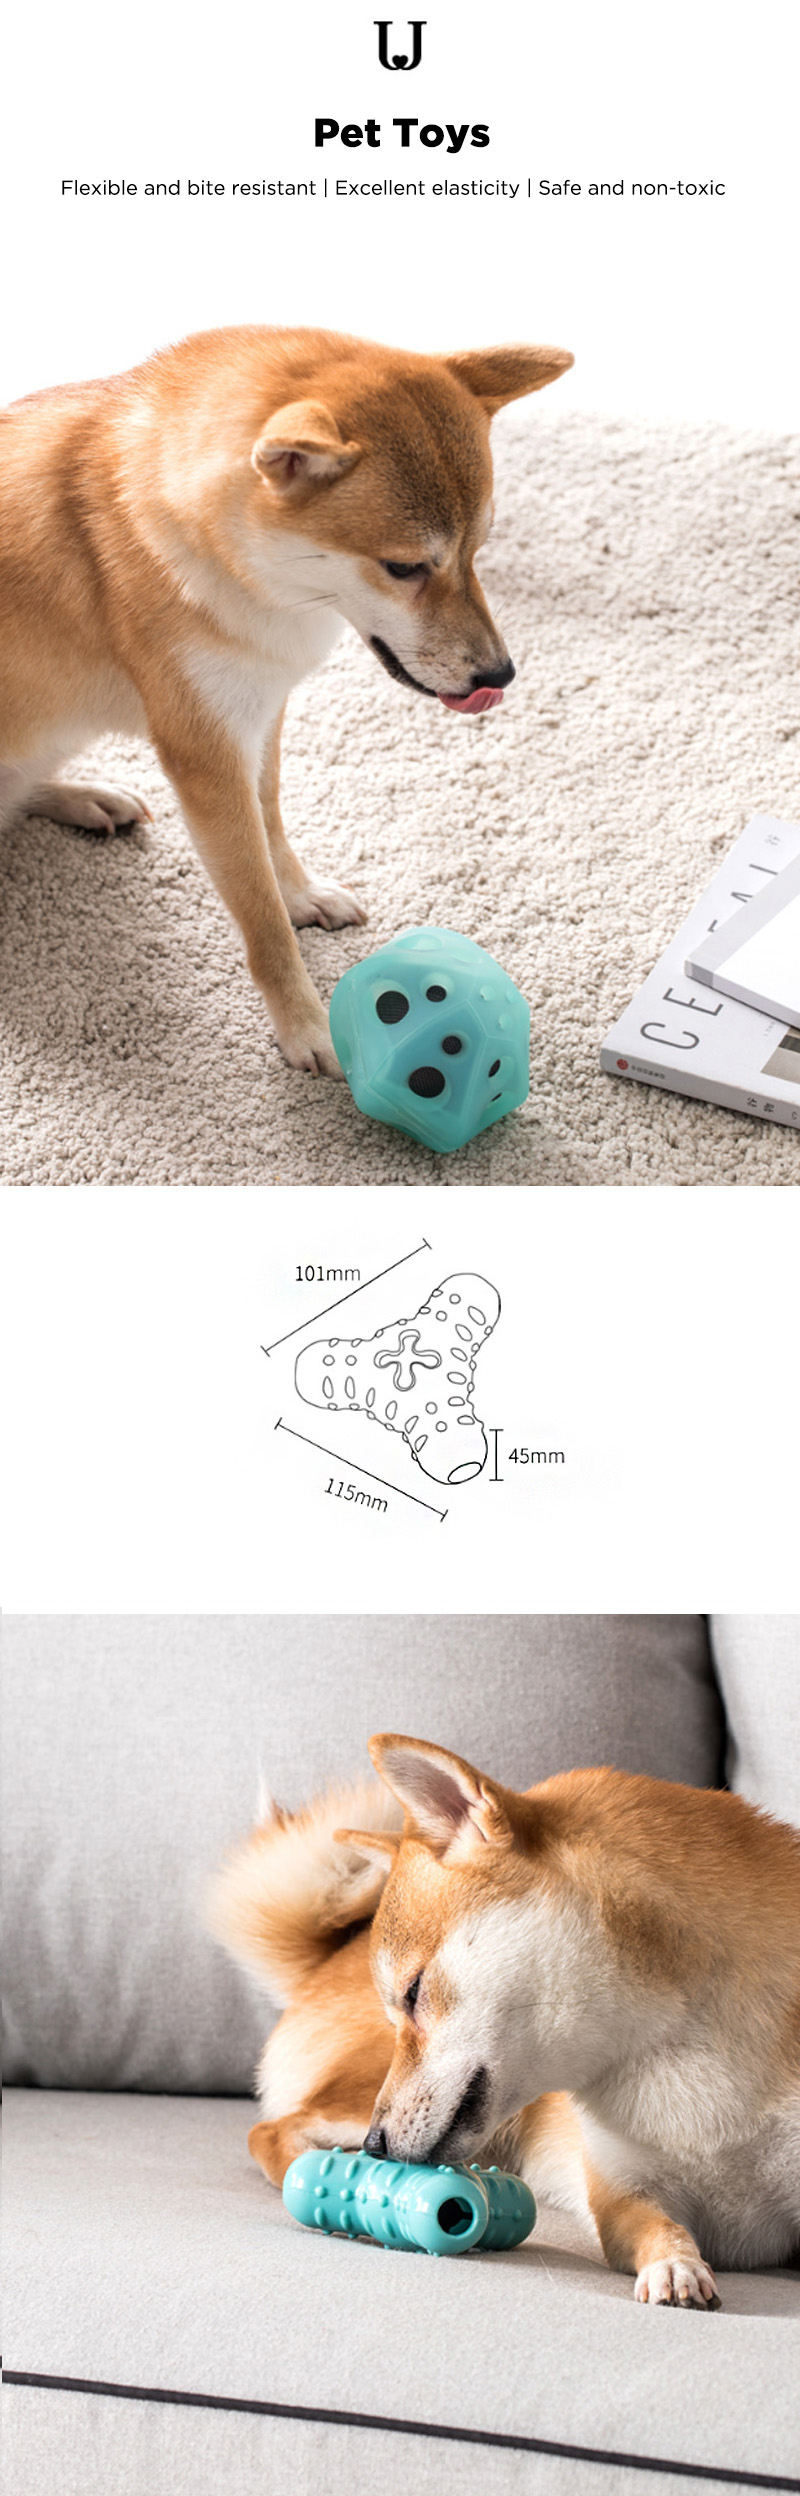 JordanJudy-Pet-Toys-Waterproof-Dog-Cat-Vocal-Toy-Bite-Resistant-Tooth-Clean-Interactive-Pet-Dog-Toy-1597518-1